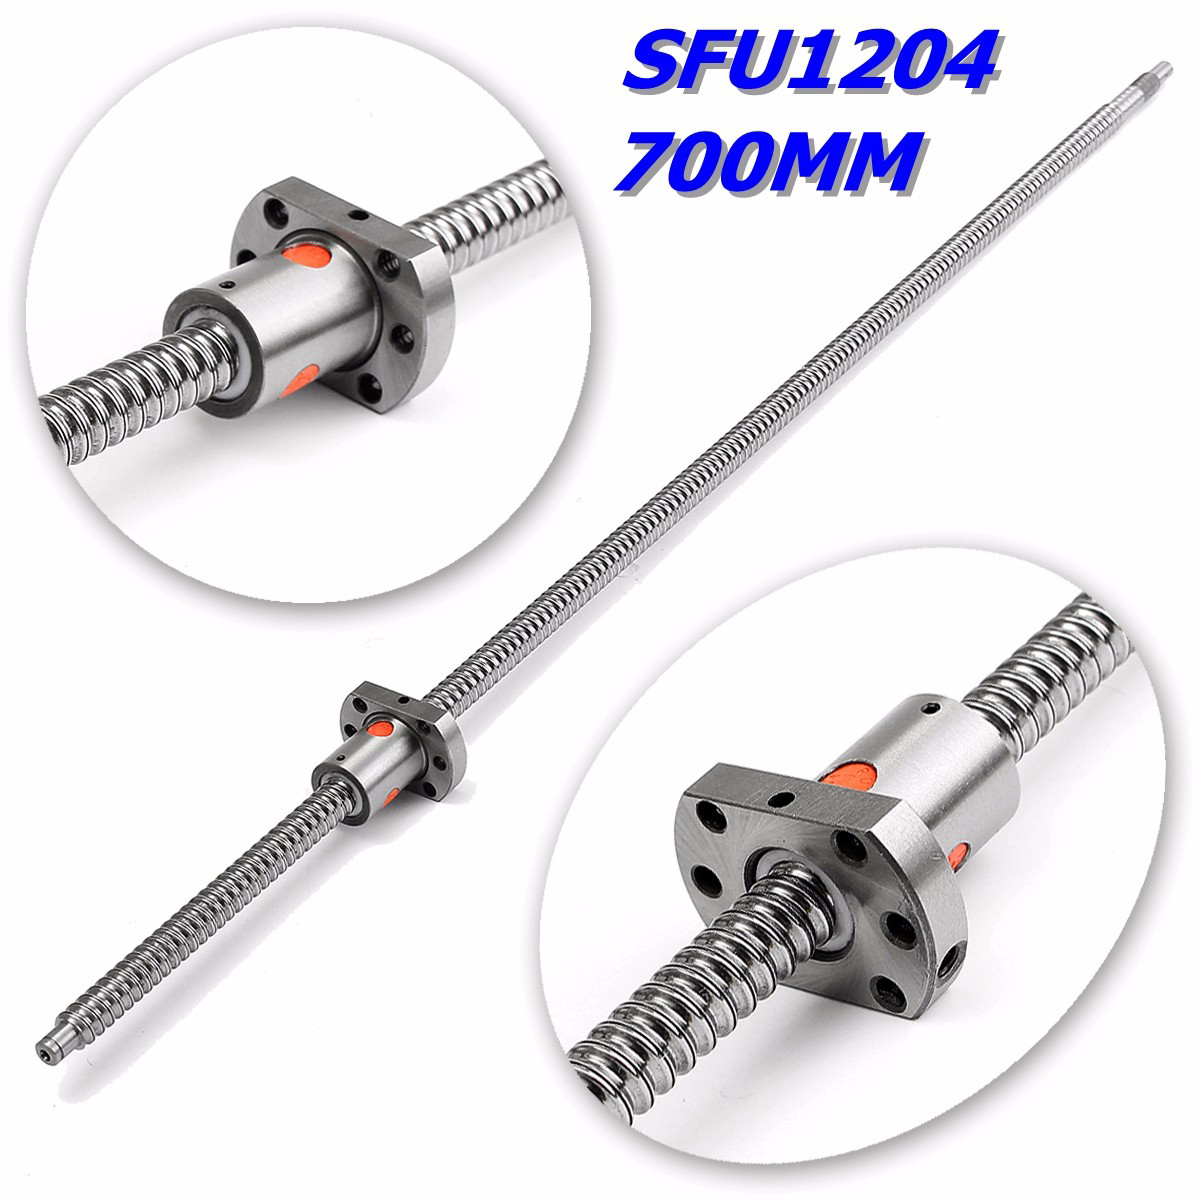 SFU1204 L700mm rolled ball screw C7 with 1204 for BK/BF10 end machined CNC parts 